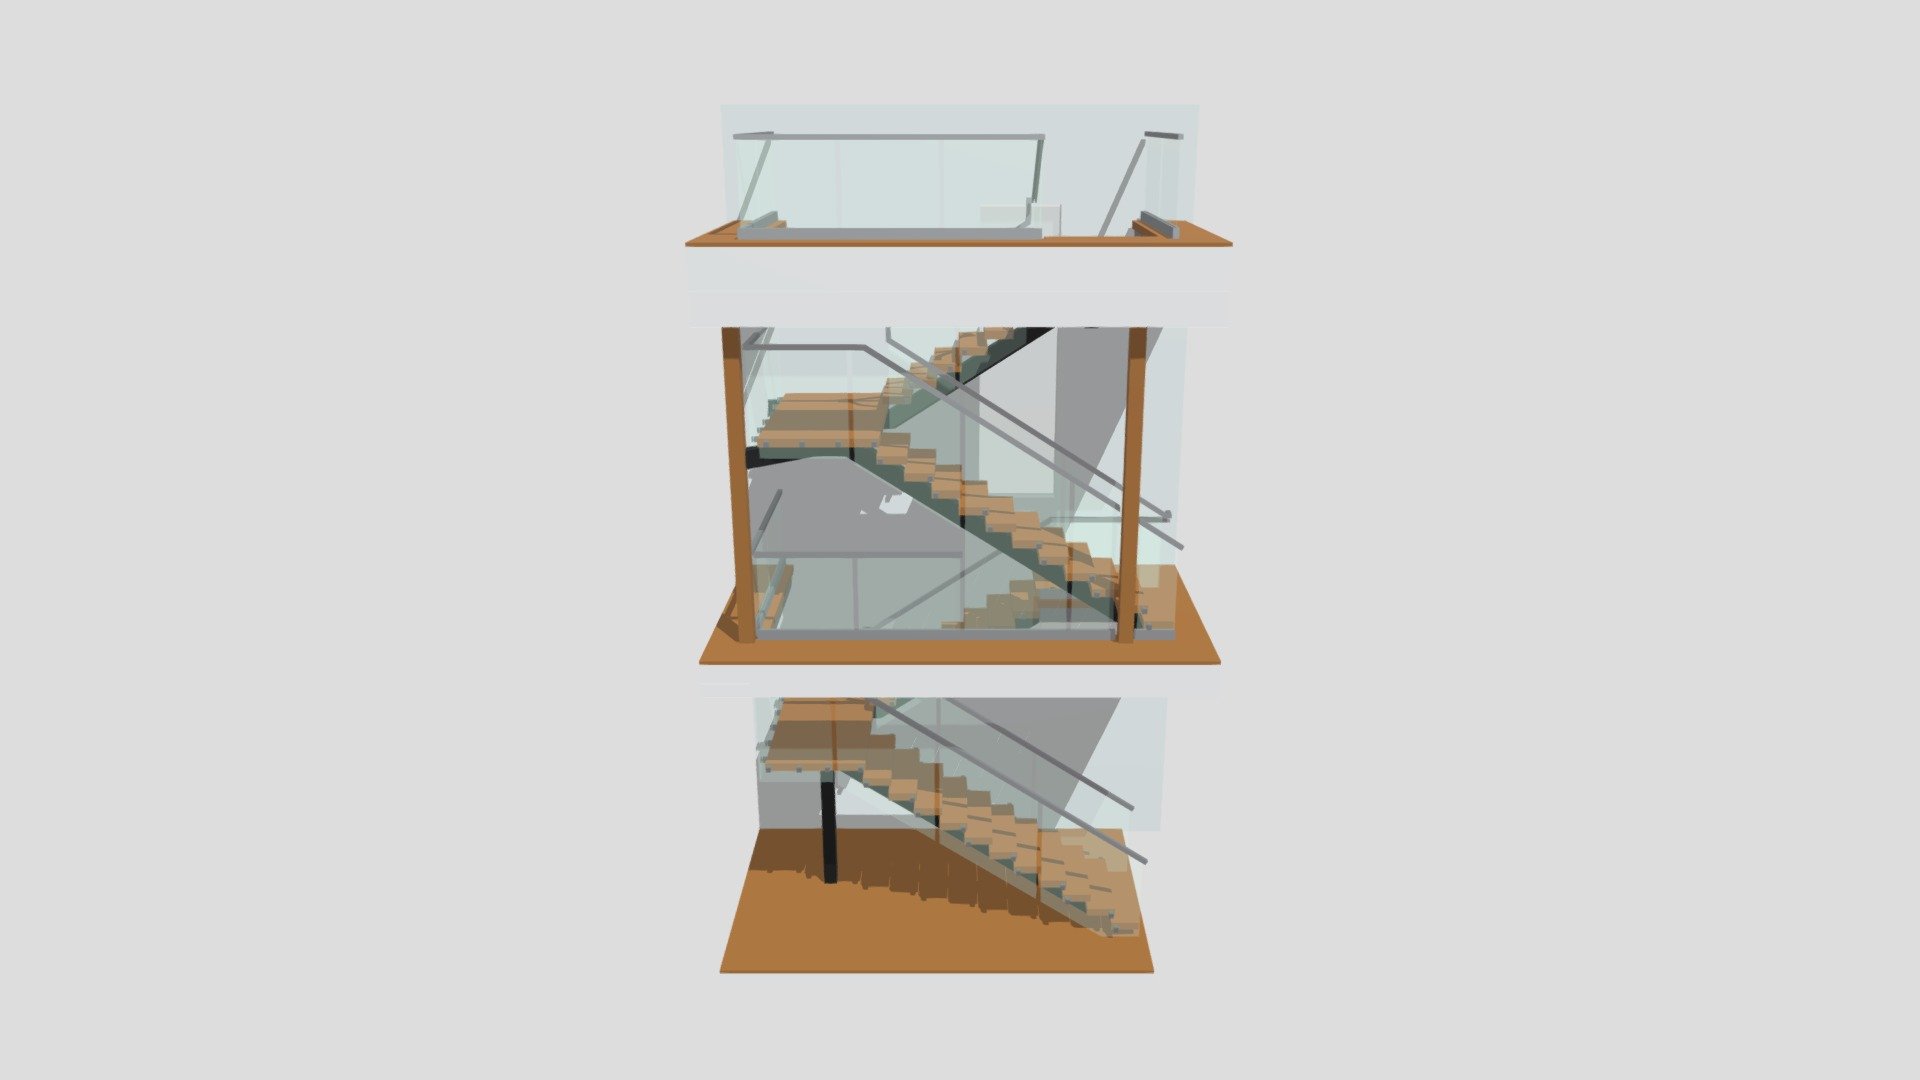 Mono-Beam Straight Stair, Glass Balustrade with Standoff fasteners and Glass Base Shoe on Balconies. Beam is powder coated black, White Oak treads and Risers, Aluminum Handrail, Standoff and Glass Shoe is Brushed Stainless Steel 3d model